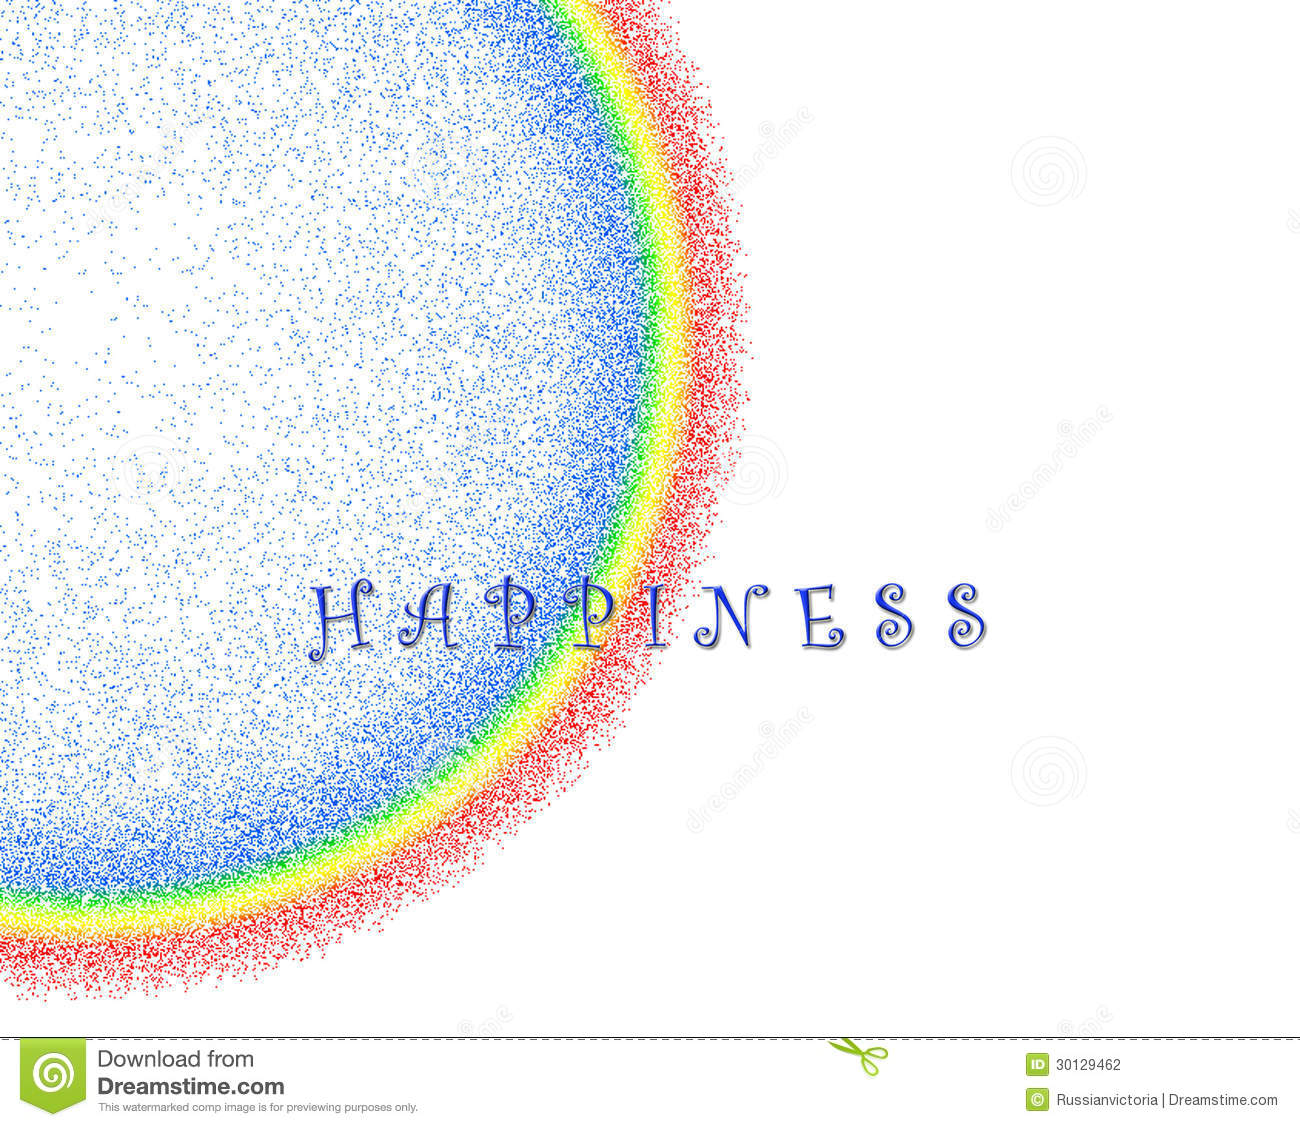 This Is A Clip Art Image For The Word Happiness  The Image Of A